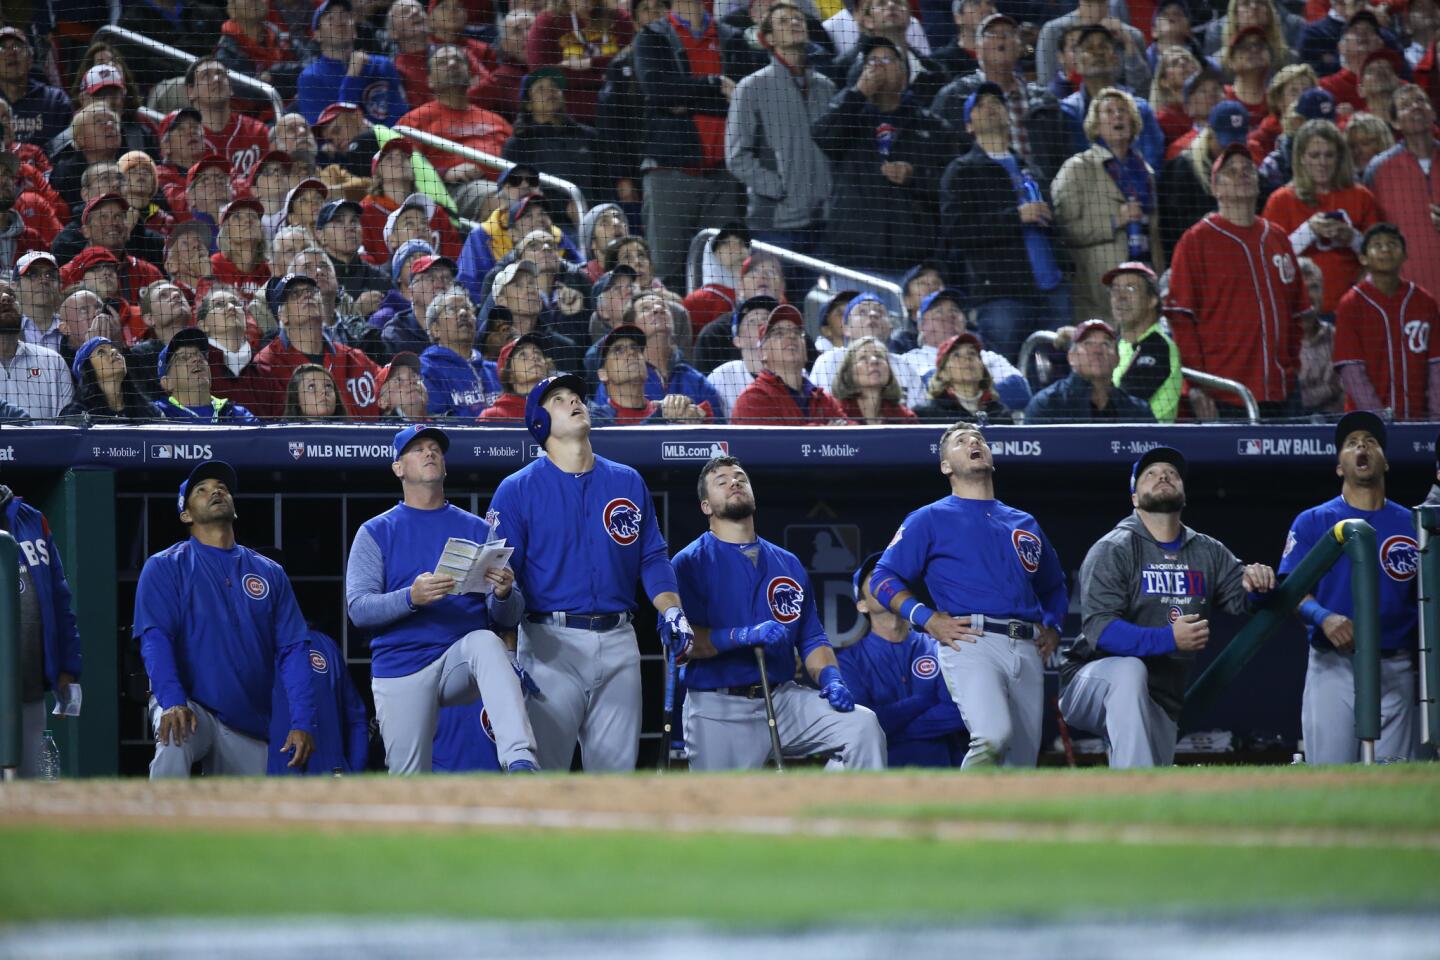 ct-nlds-game-5-cubs-at-nationals-photos-201710-041